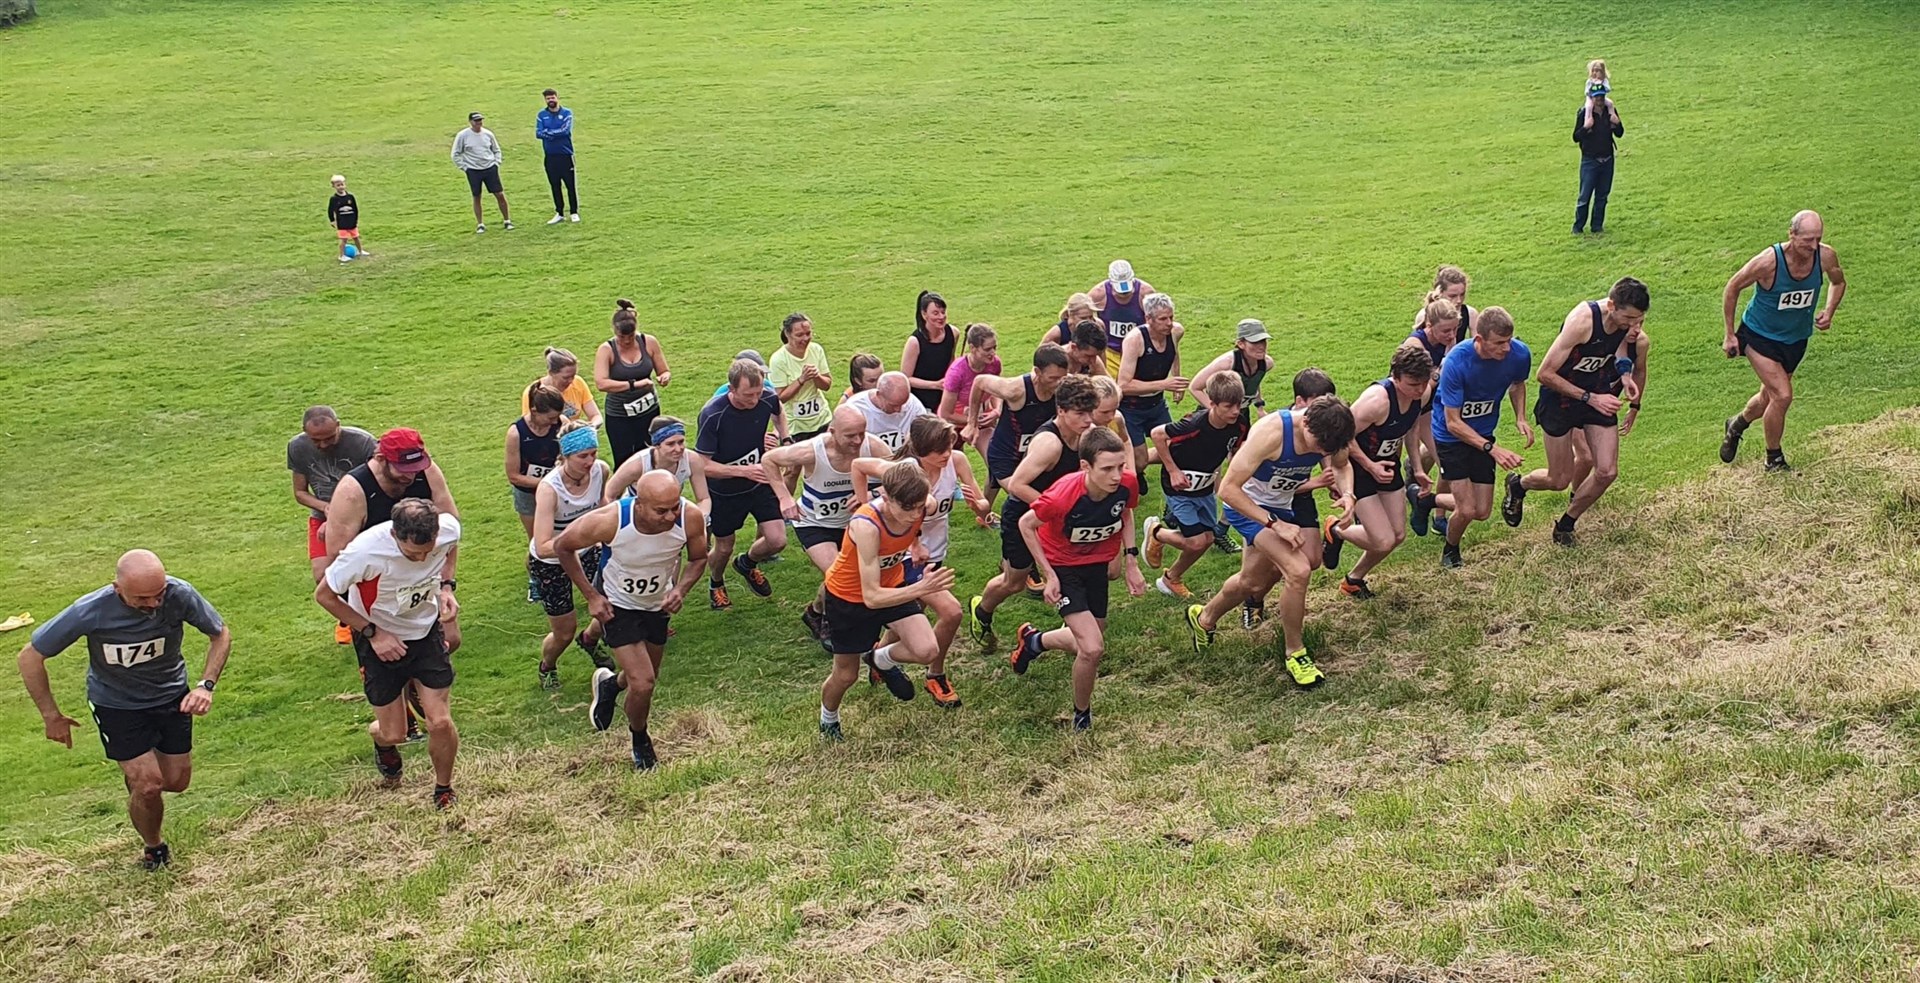 They're off! 40 starters up the hill in Ardvonie Park on Sunday